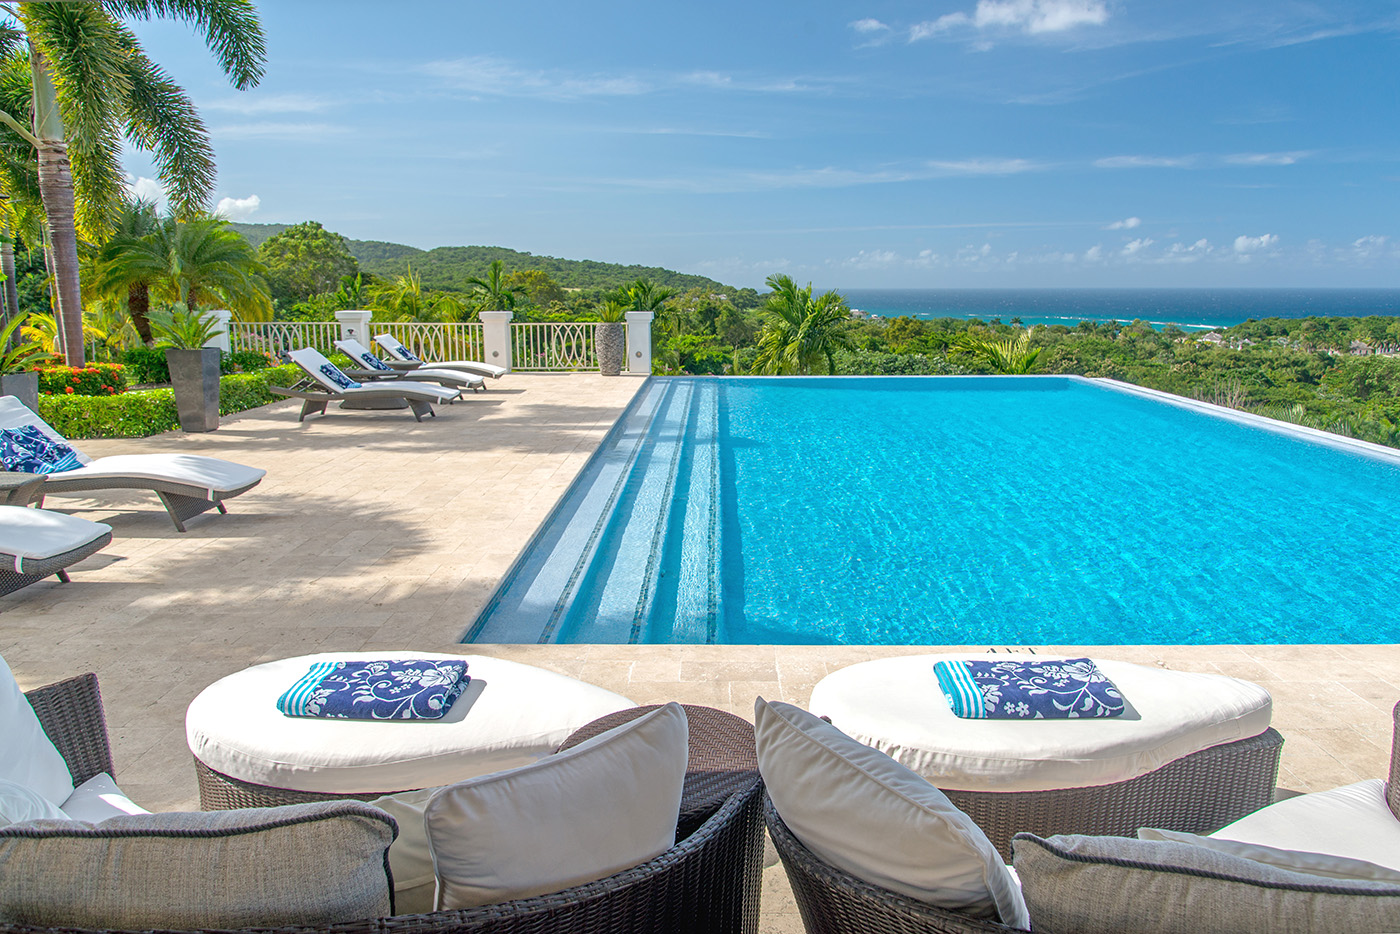 Loungers at Harmony Hill in Jamaica